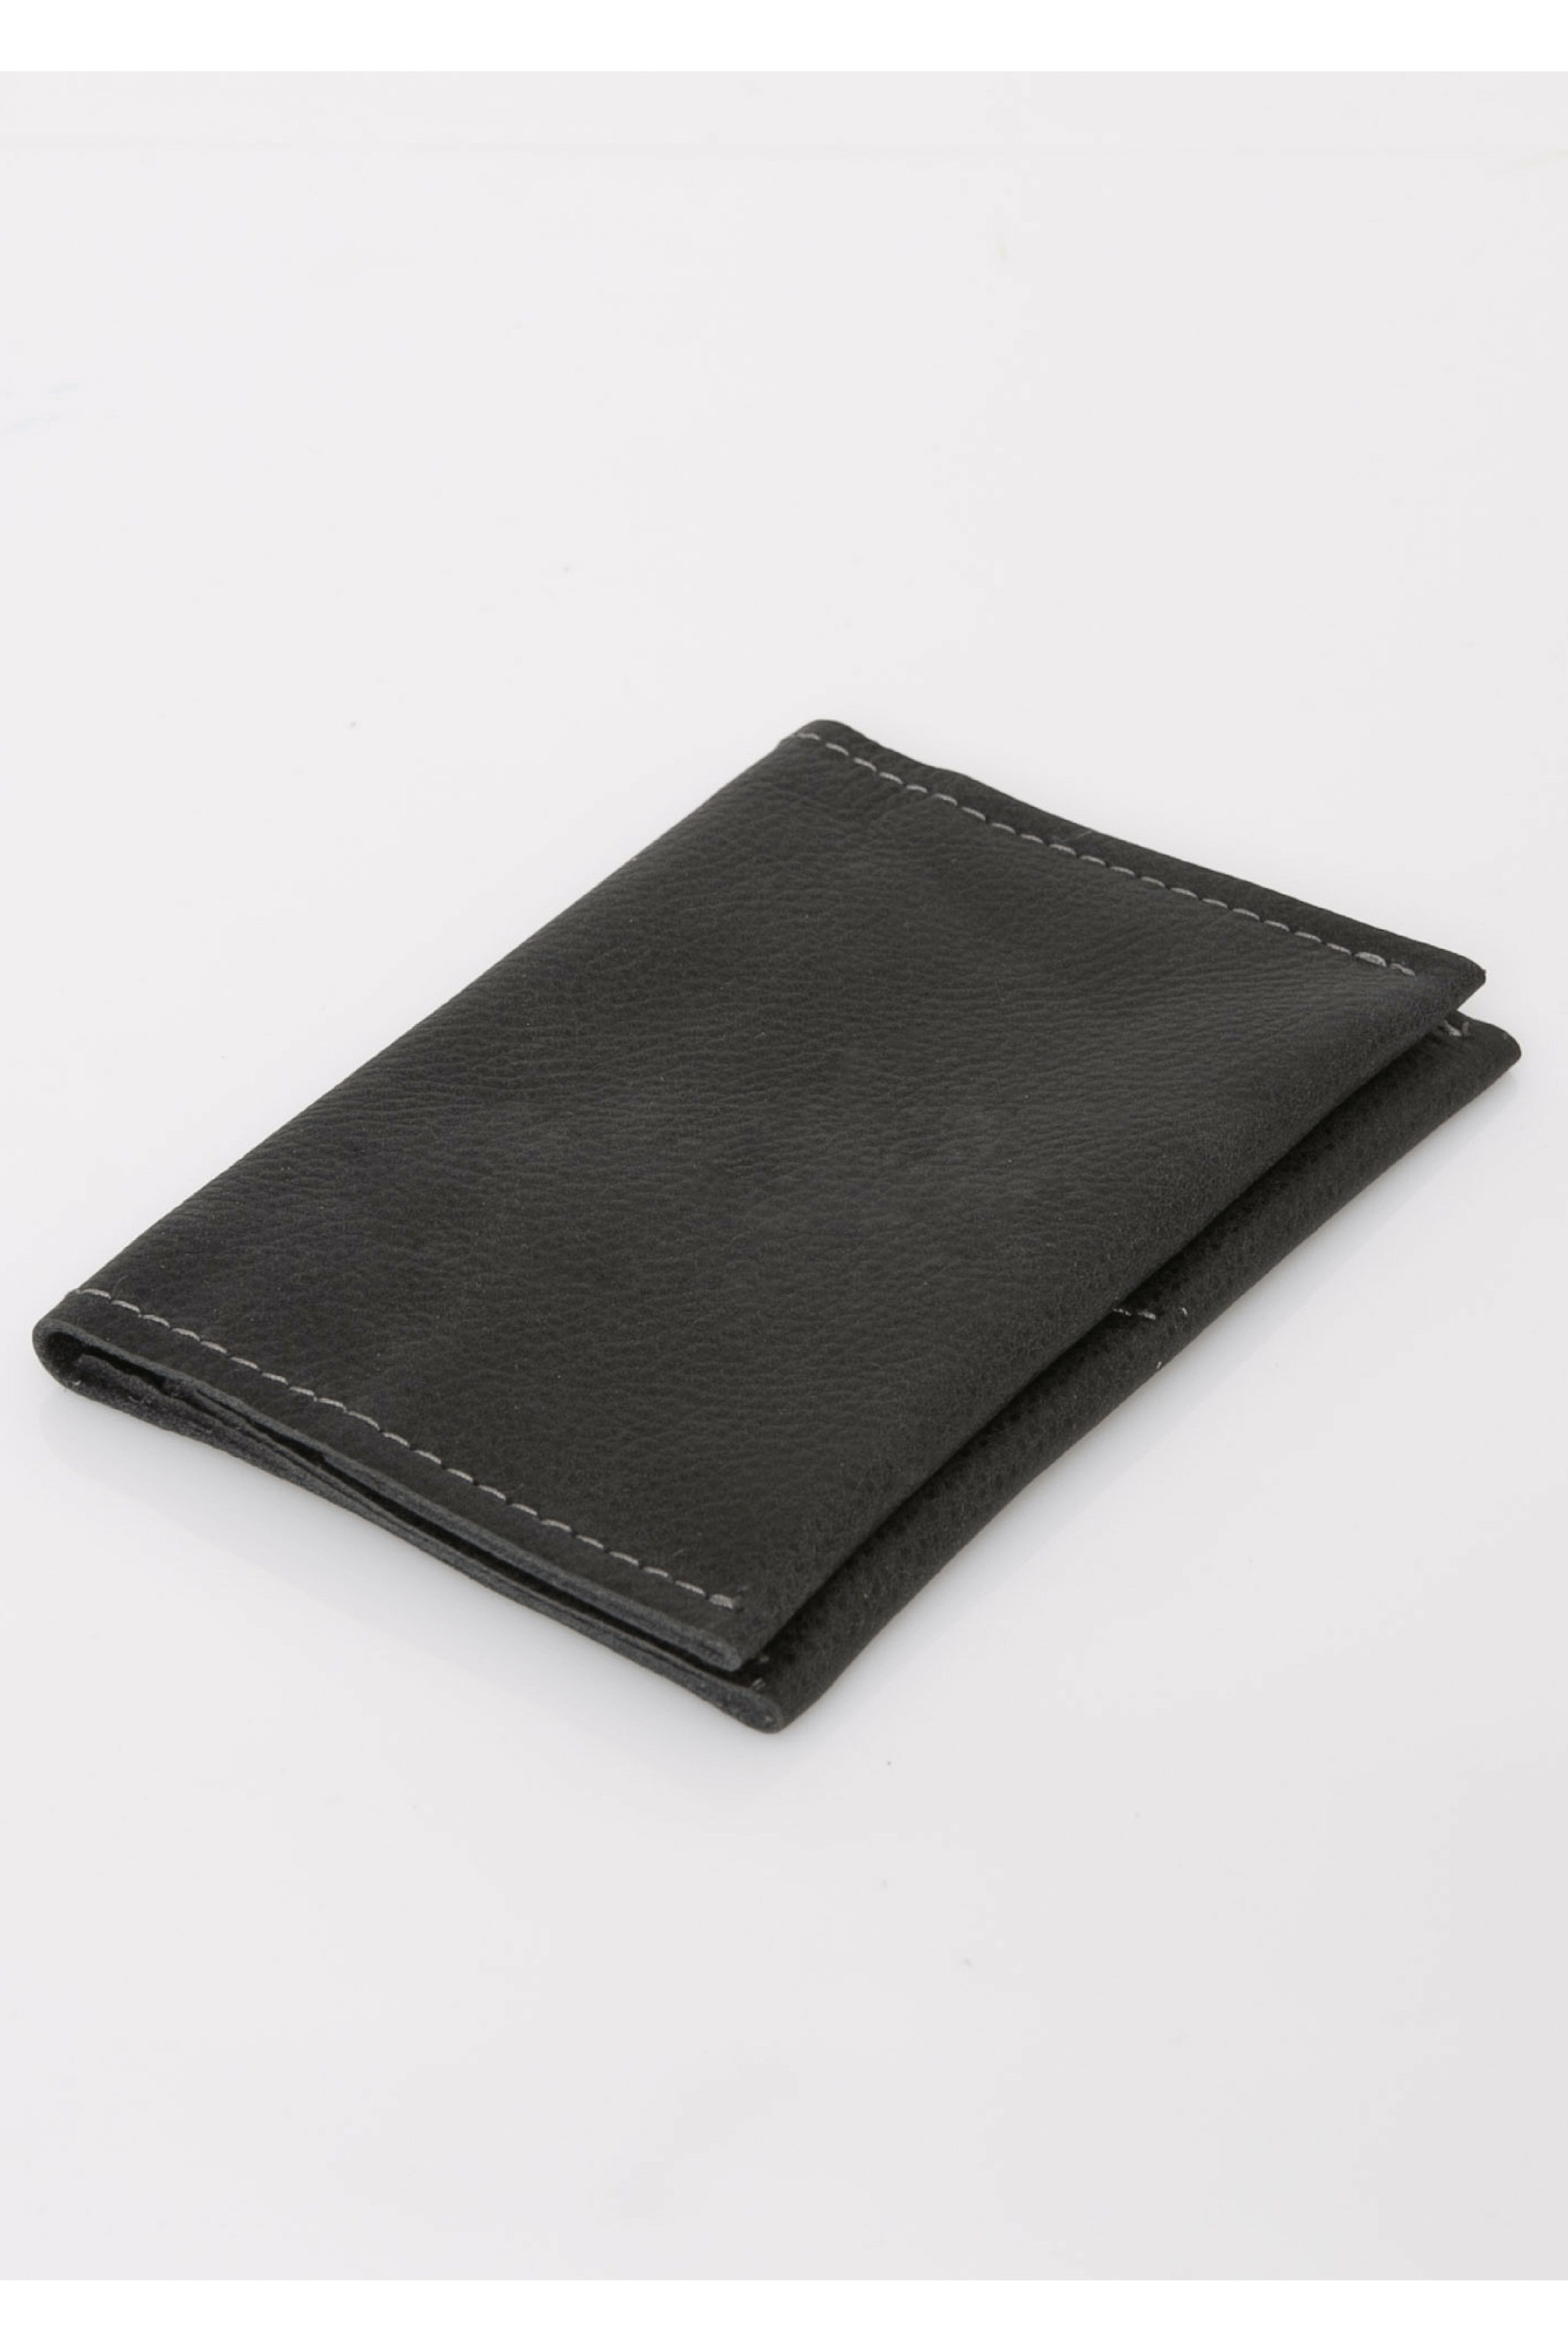 leather passport cover - Mayko Bags